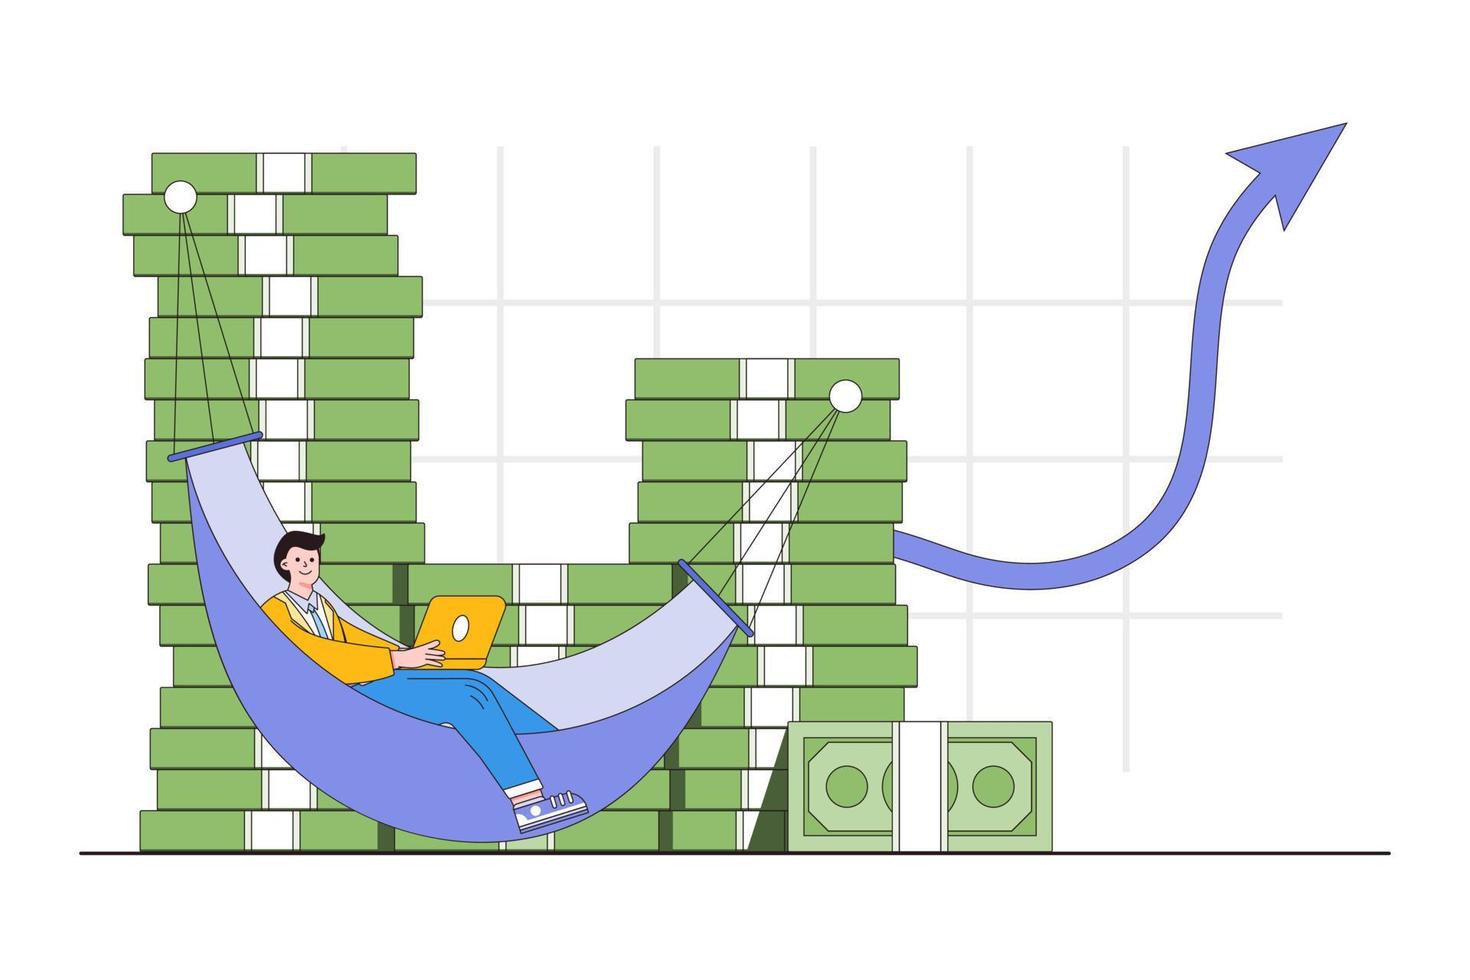 Success investment growing more profit, easy earning, crypto trading, financial goals achievement, dream being rich concept. Businessman relax using hammock on stack of money with arrow upward vector